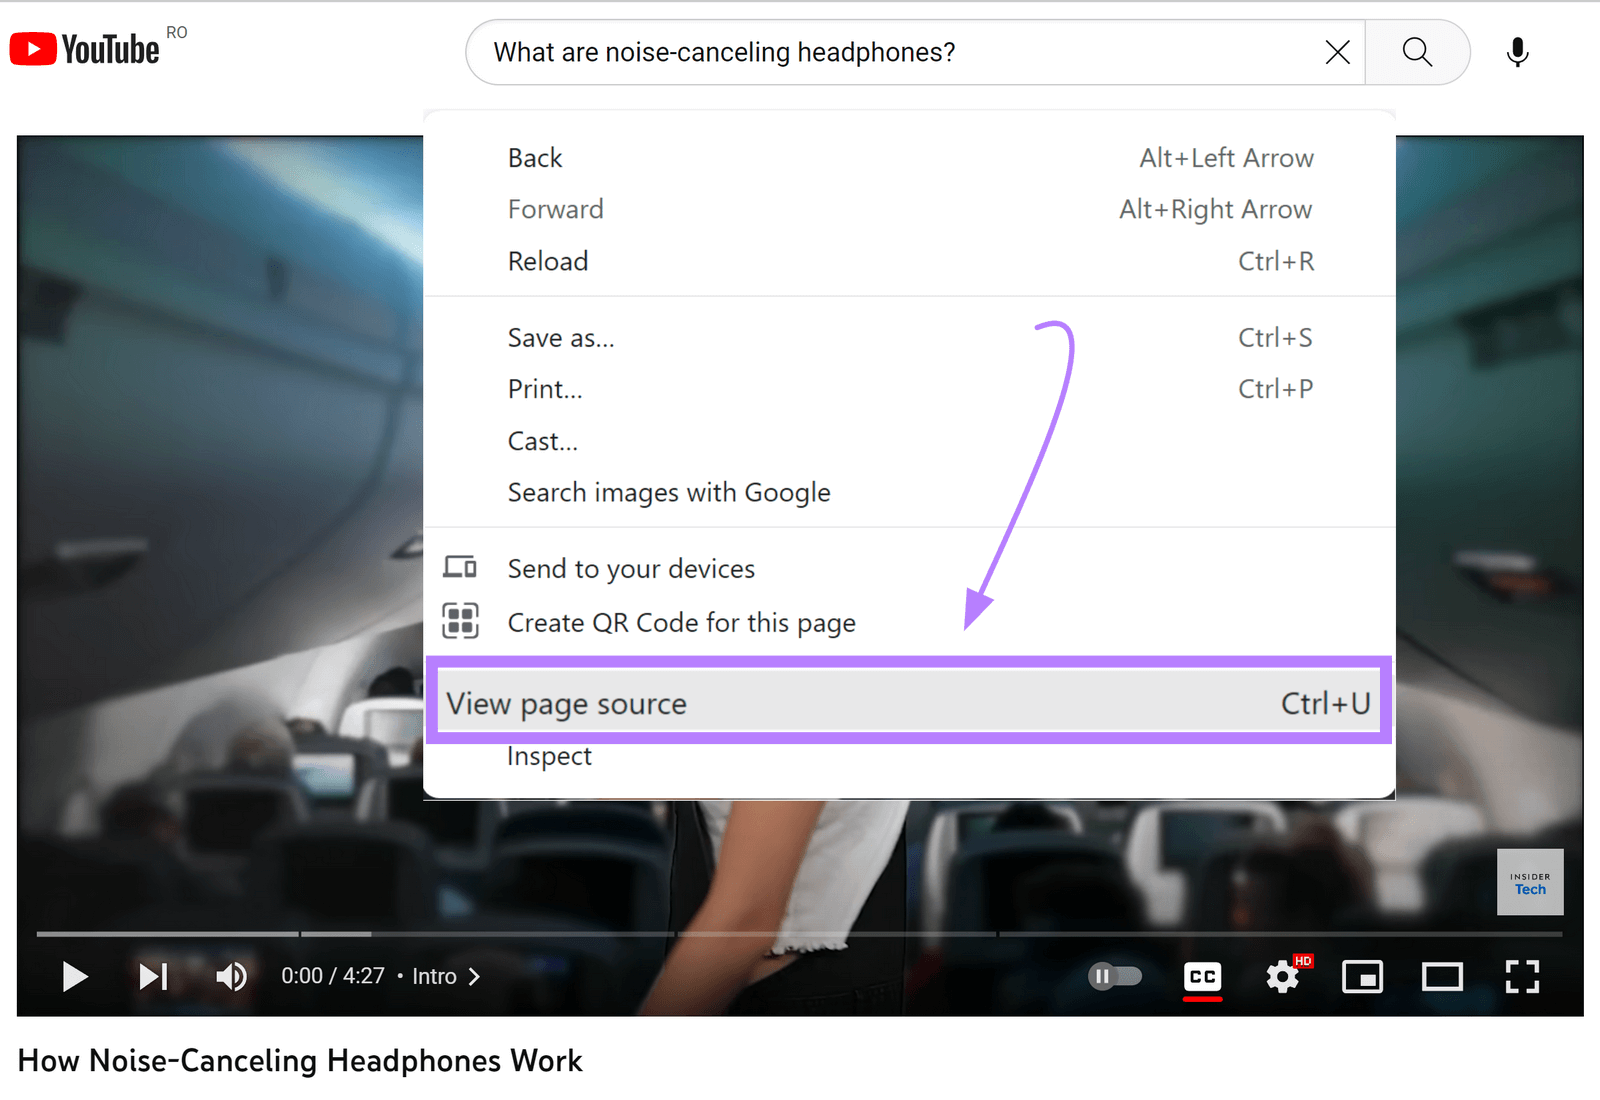 “View page source” option shown for a YouTube video.